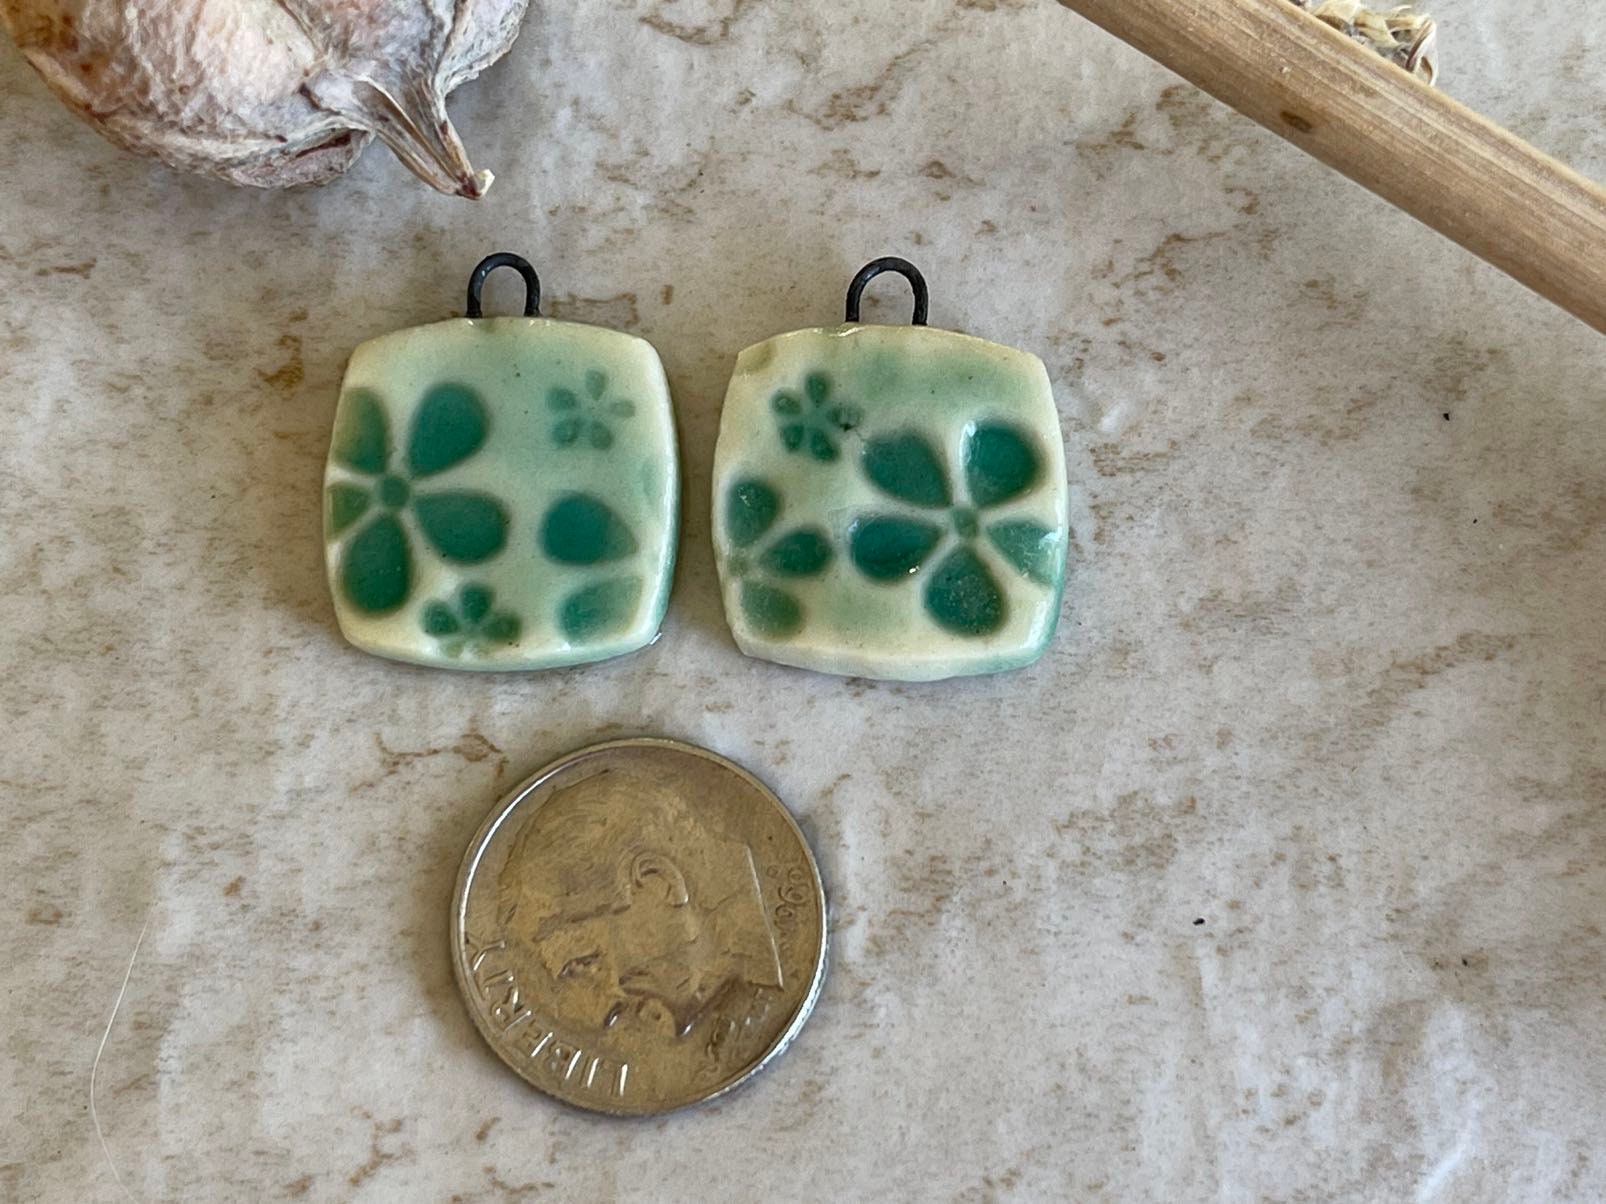 Turquoise Flower Pattern, Turquoise Earring Bead Pair, Porcelain Ceramic Charms, Jewelry Making Components, Beading Handmade